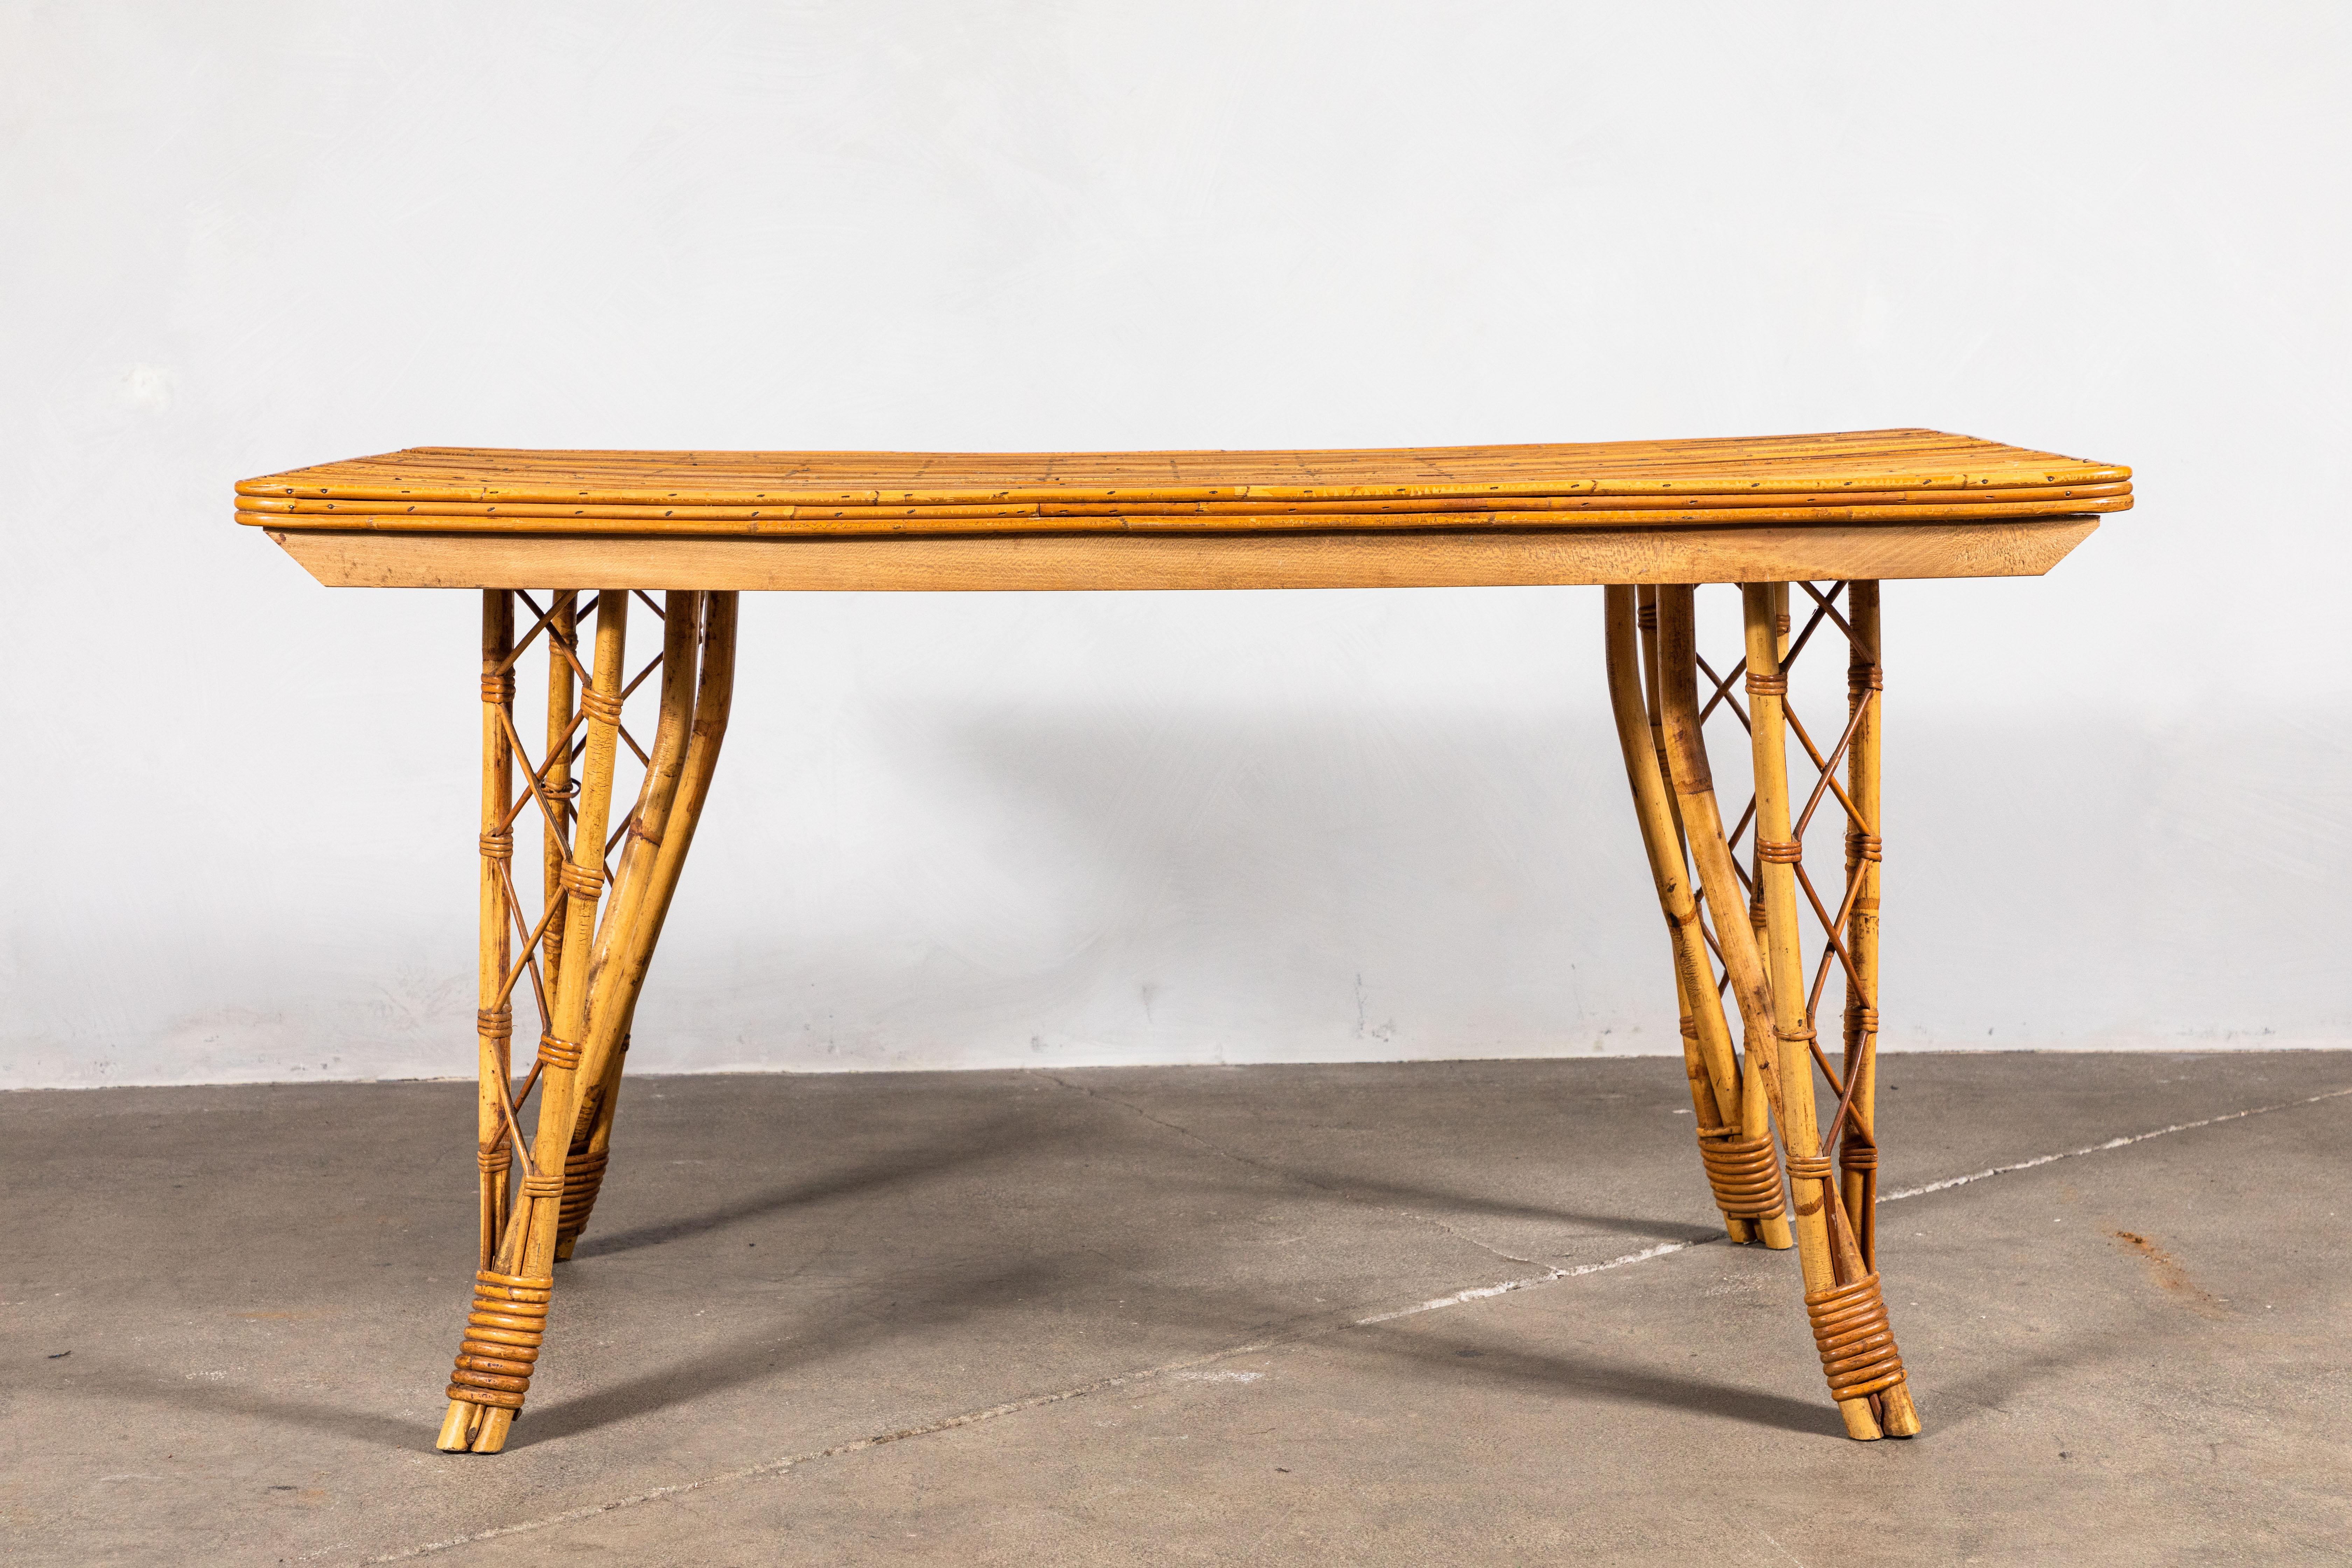 French bamboo dining table with unique and intricate details, the legs offer a zig zag triangle design.